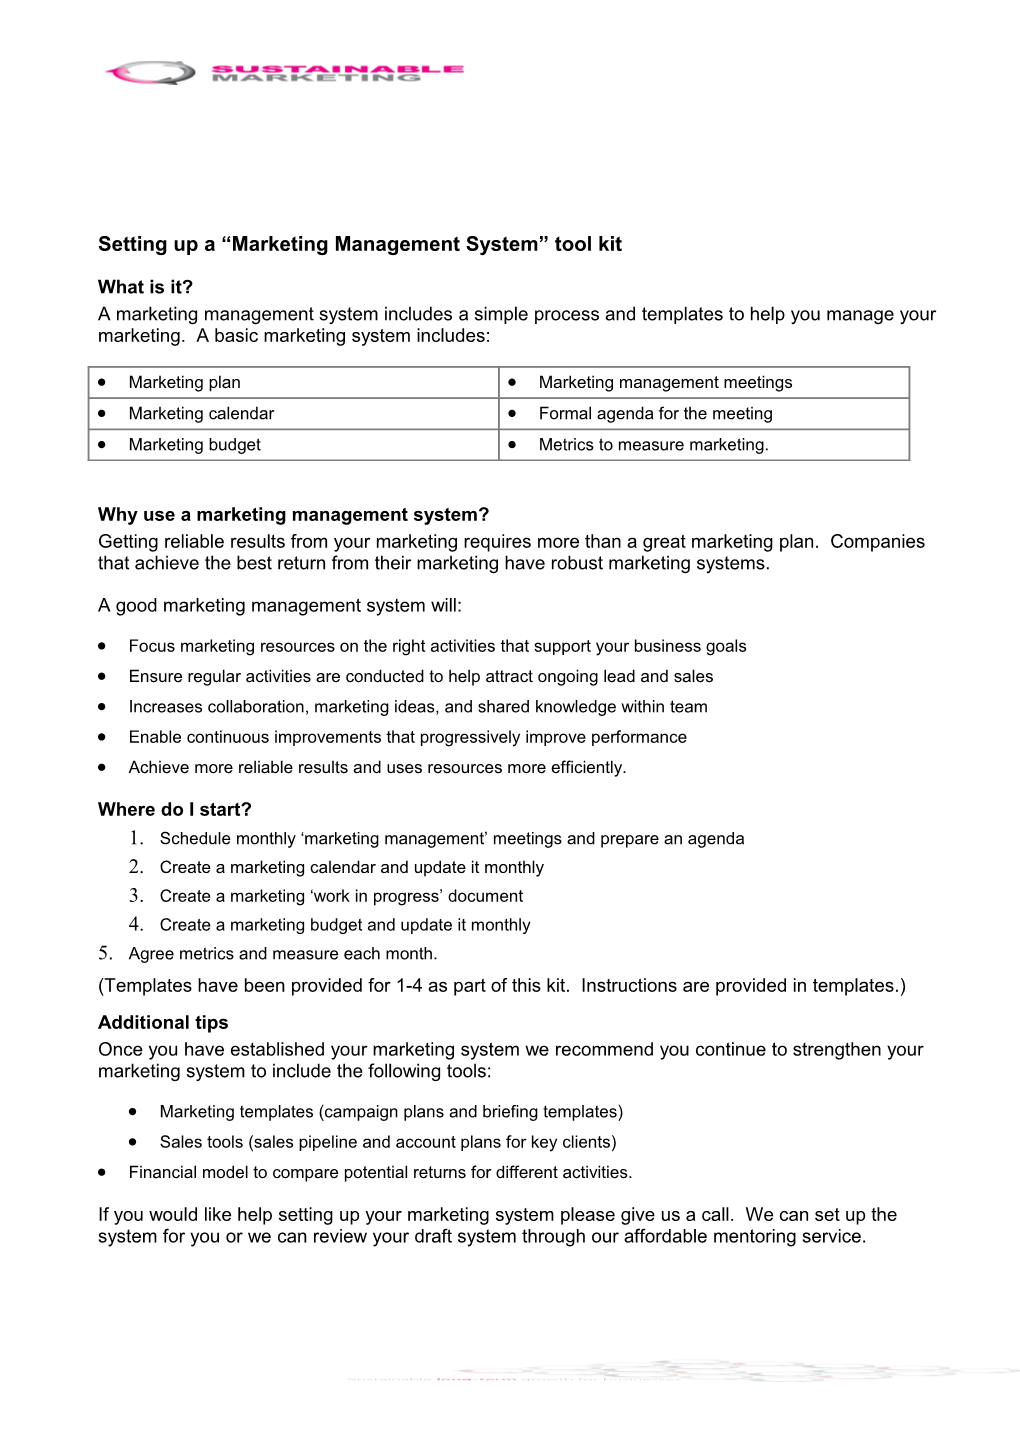 Setting up a Marketing Management System Tool Kit